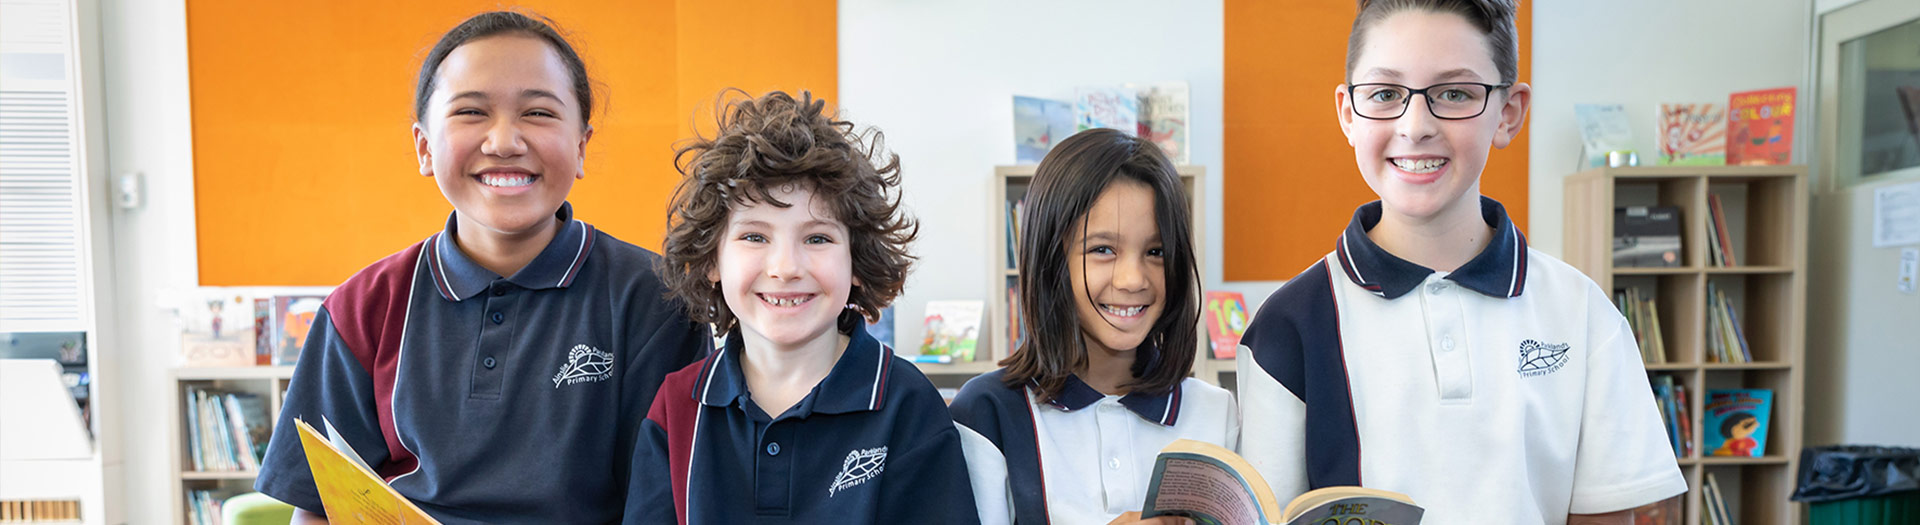 smiling students in a school library